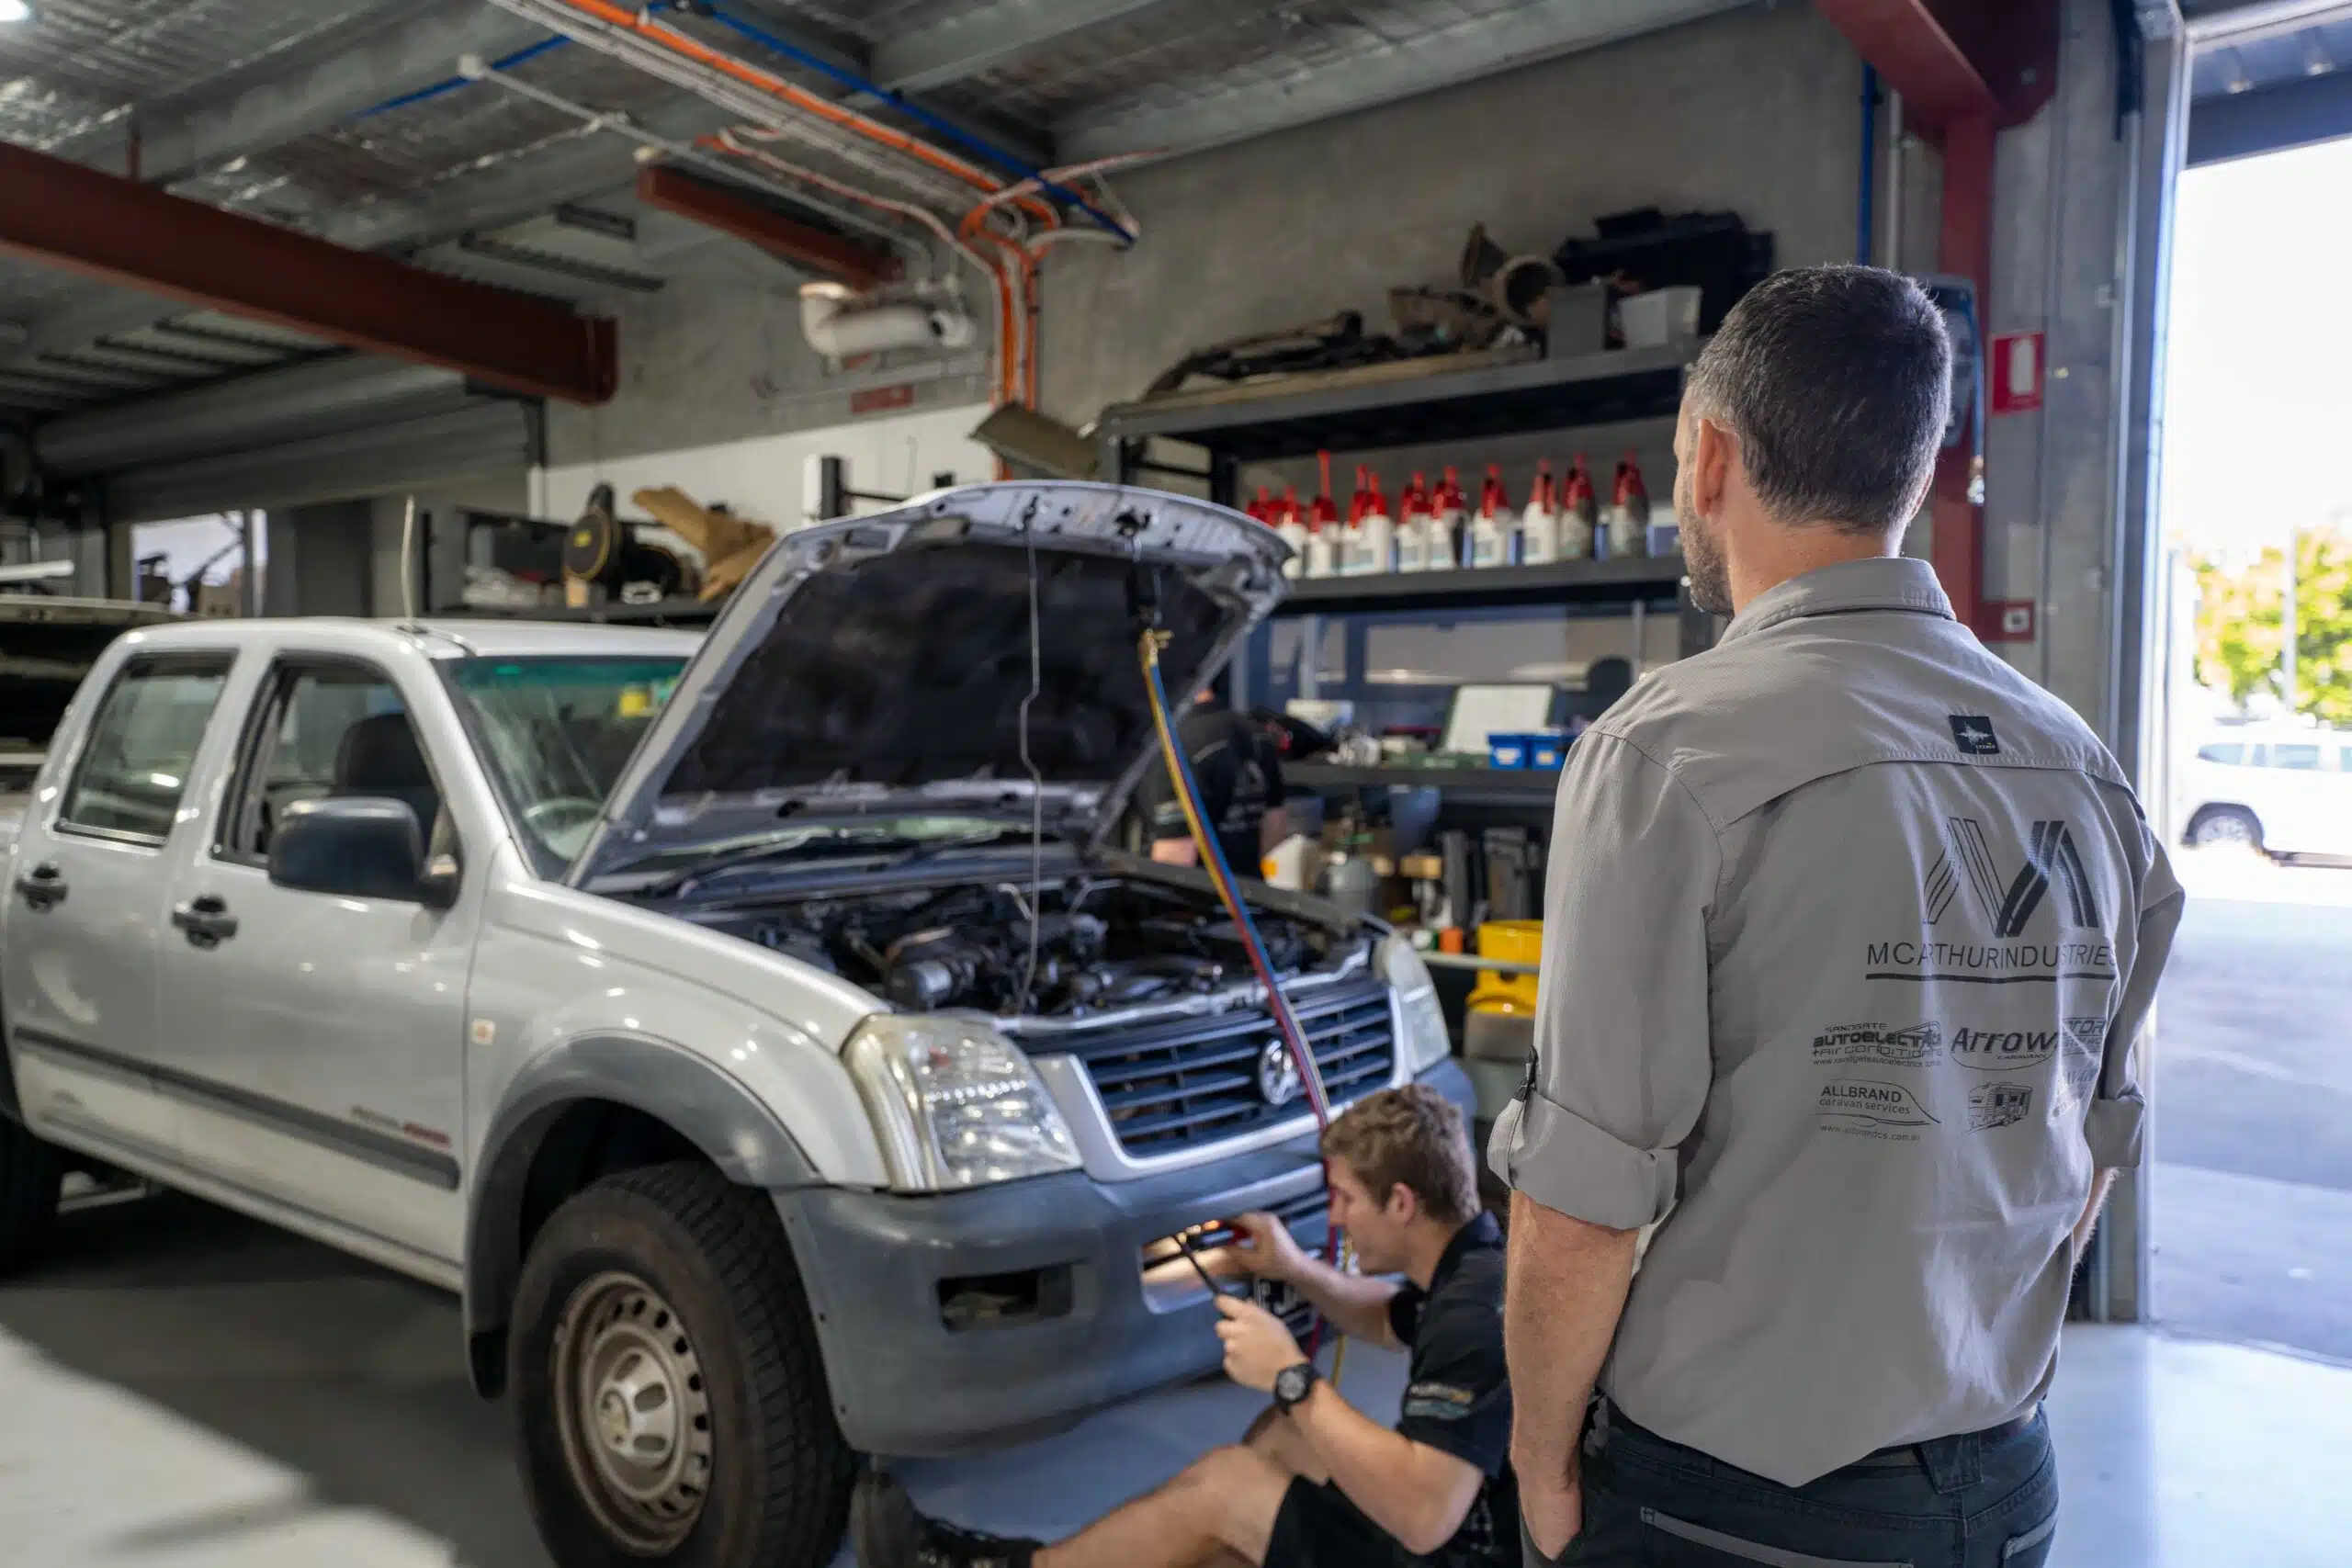 Car mechanic troubleshooting a car issue beneath a lifted vehicle in a professional repair shop.